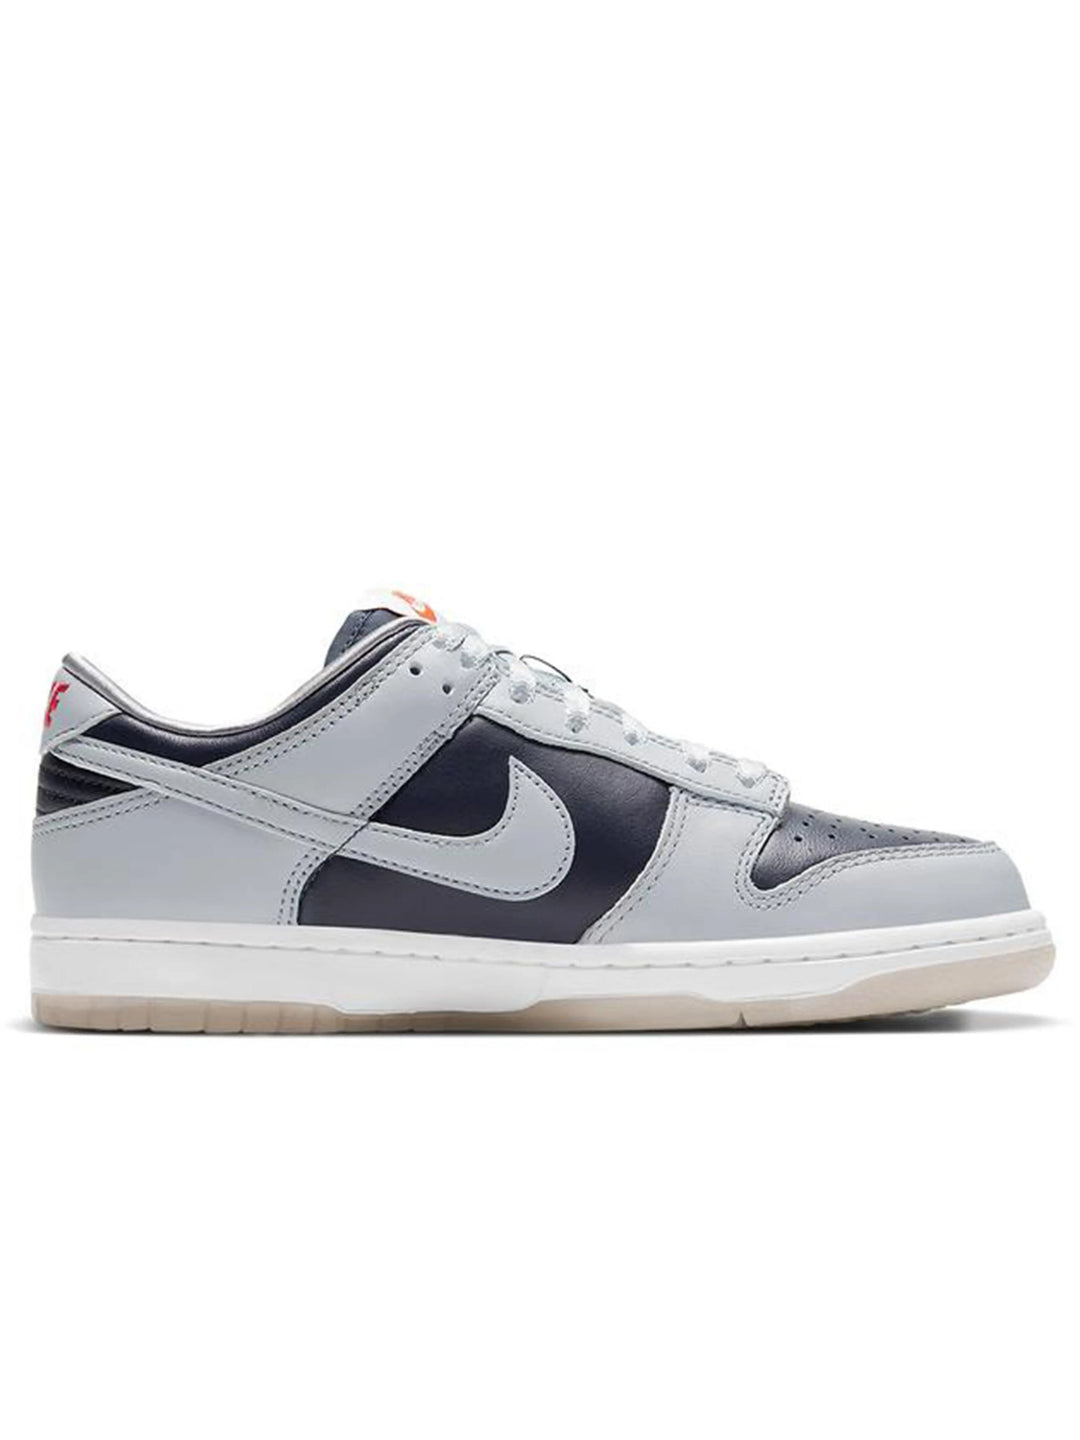 Nike Dunk Low College Navy Grey [W] Prior